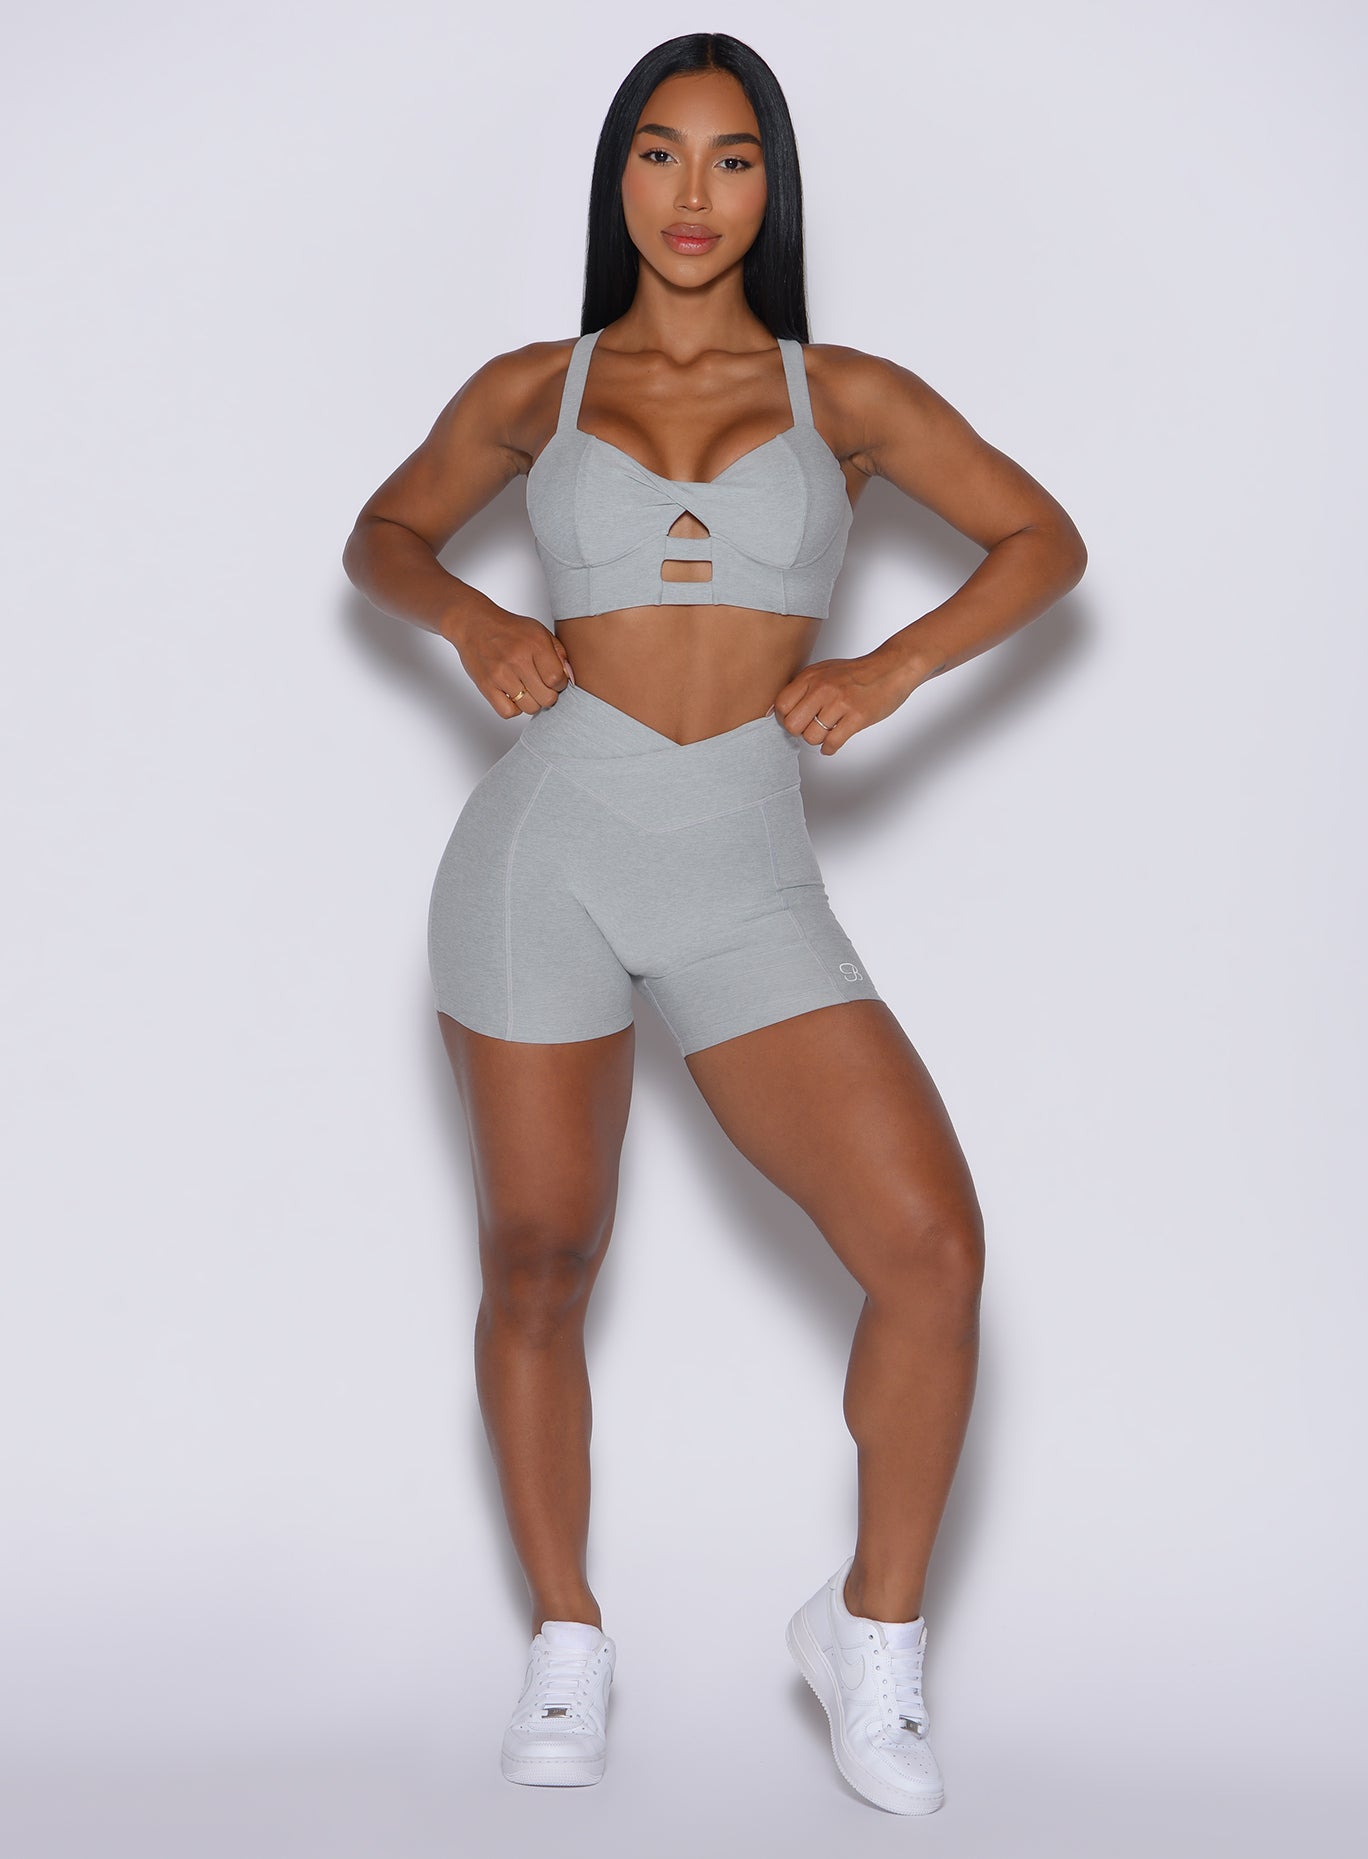 front profile view of a model wearing our Tiny Waist Shorts in Light Cloud color and a matching sports bra